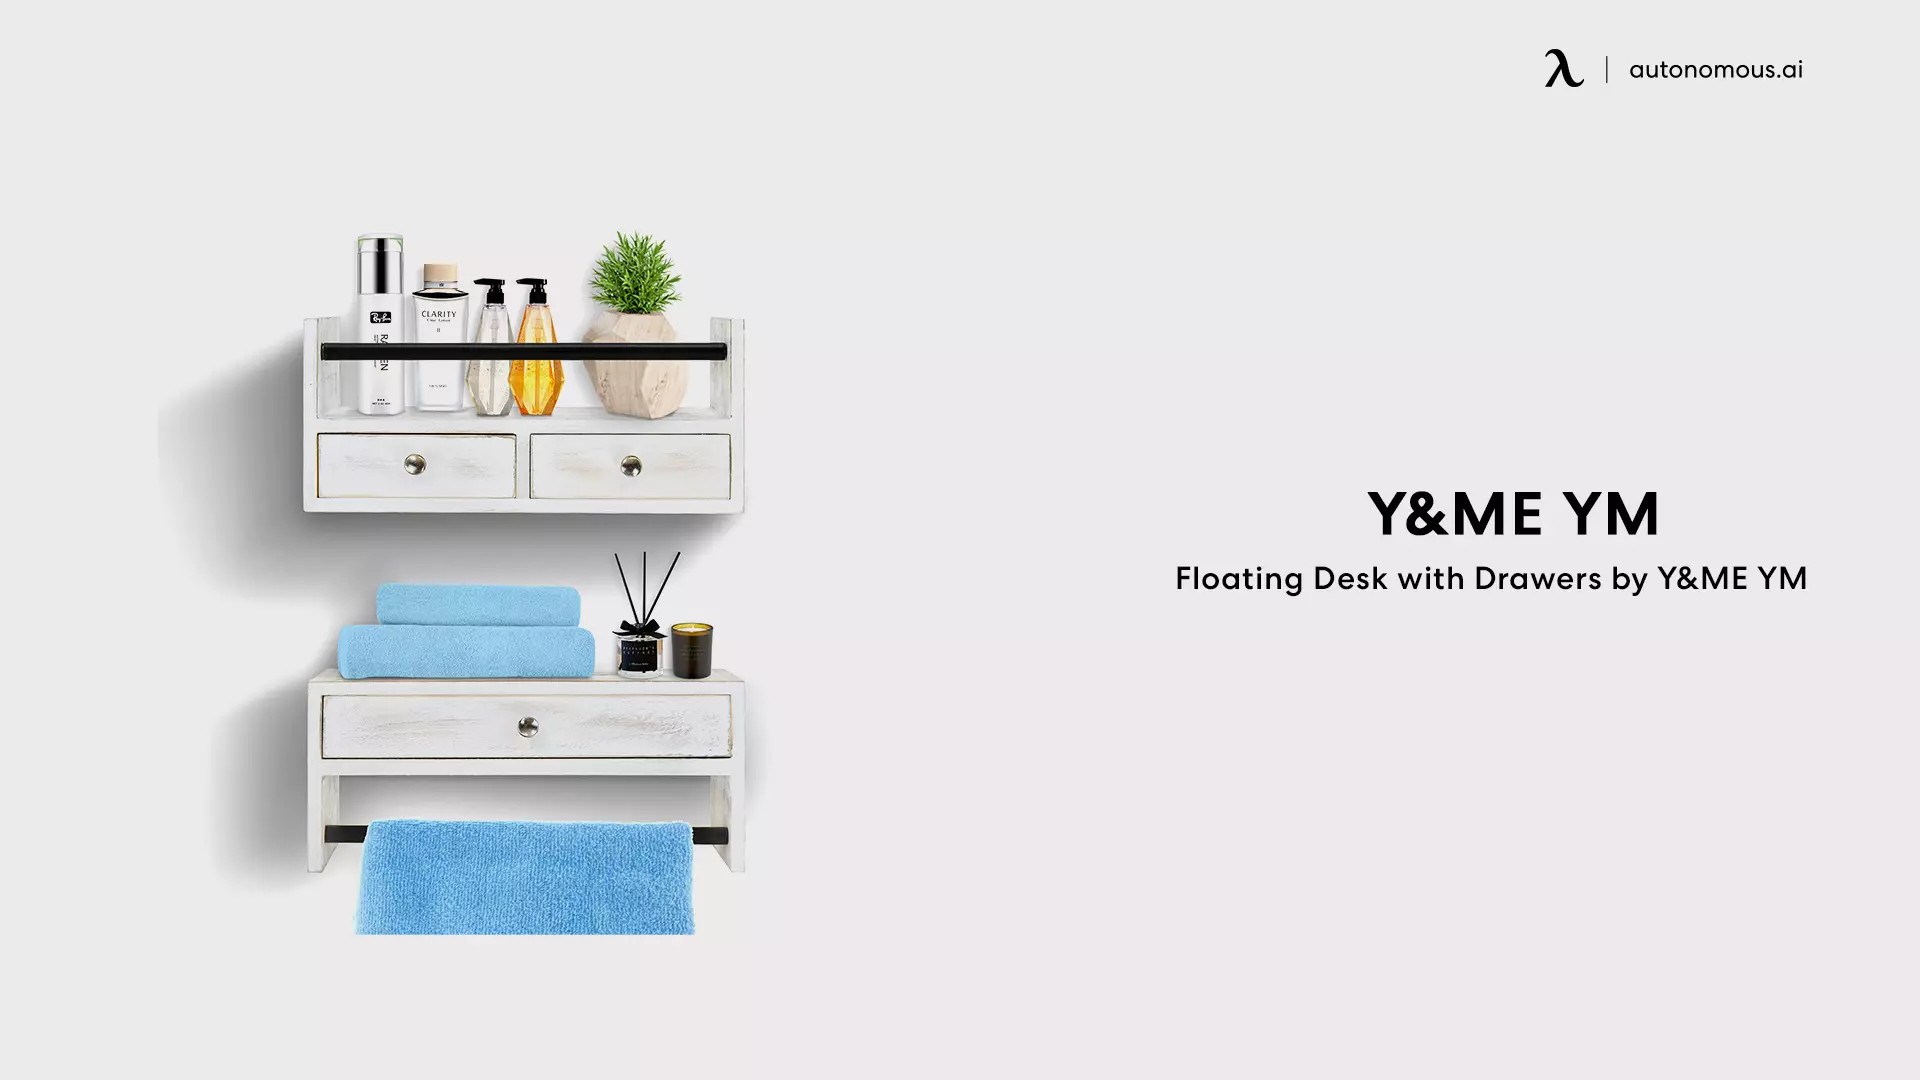 Floating Desk with Drawers by Y&ME YM